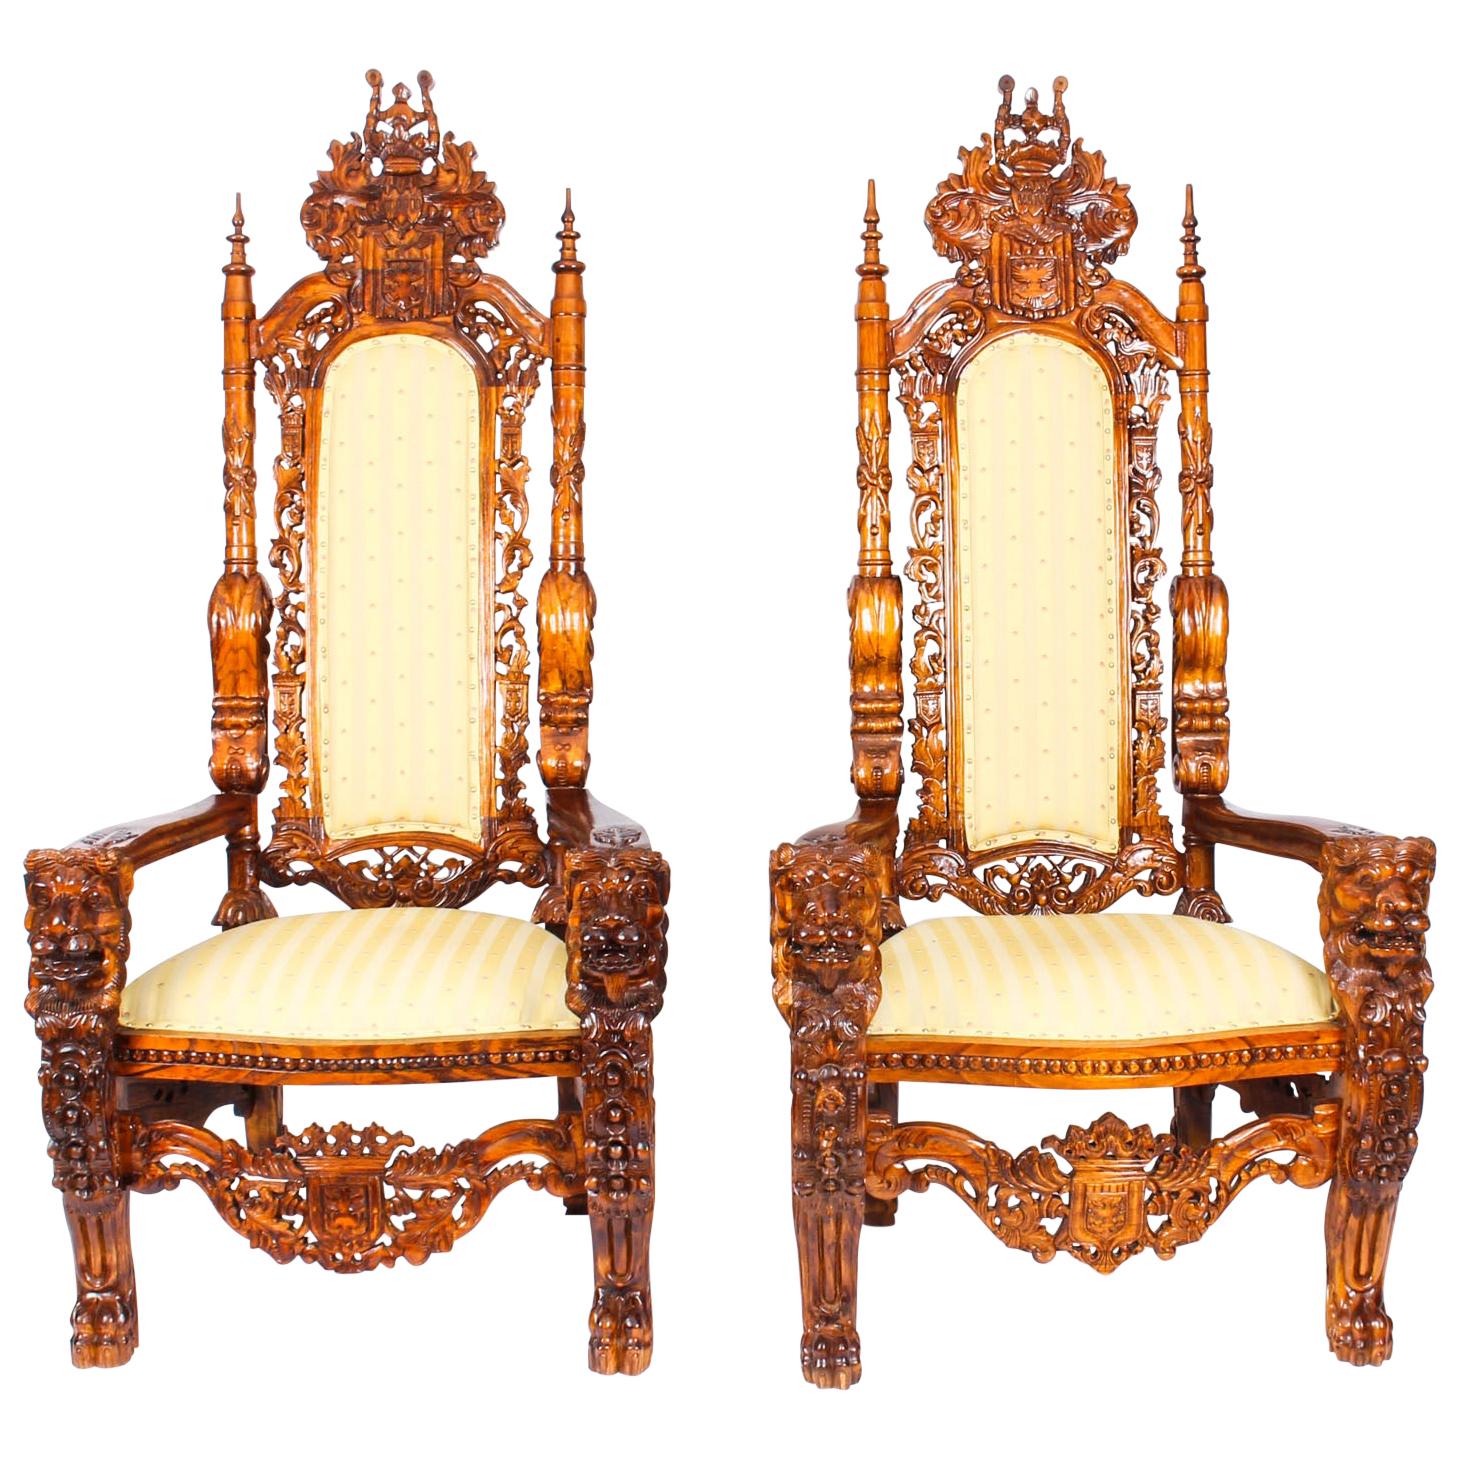 Late 19th Century European Throne King and Queen Chairs- Set of 2